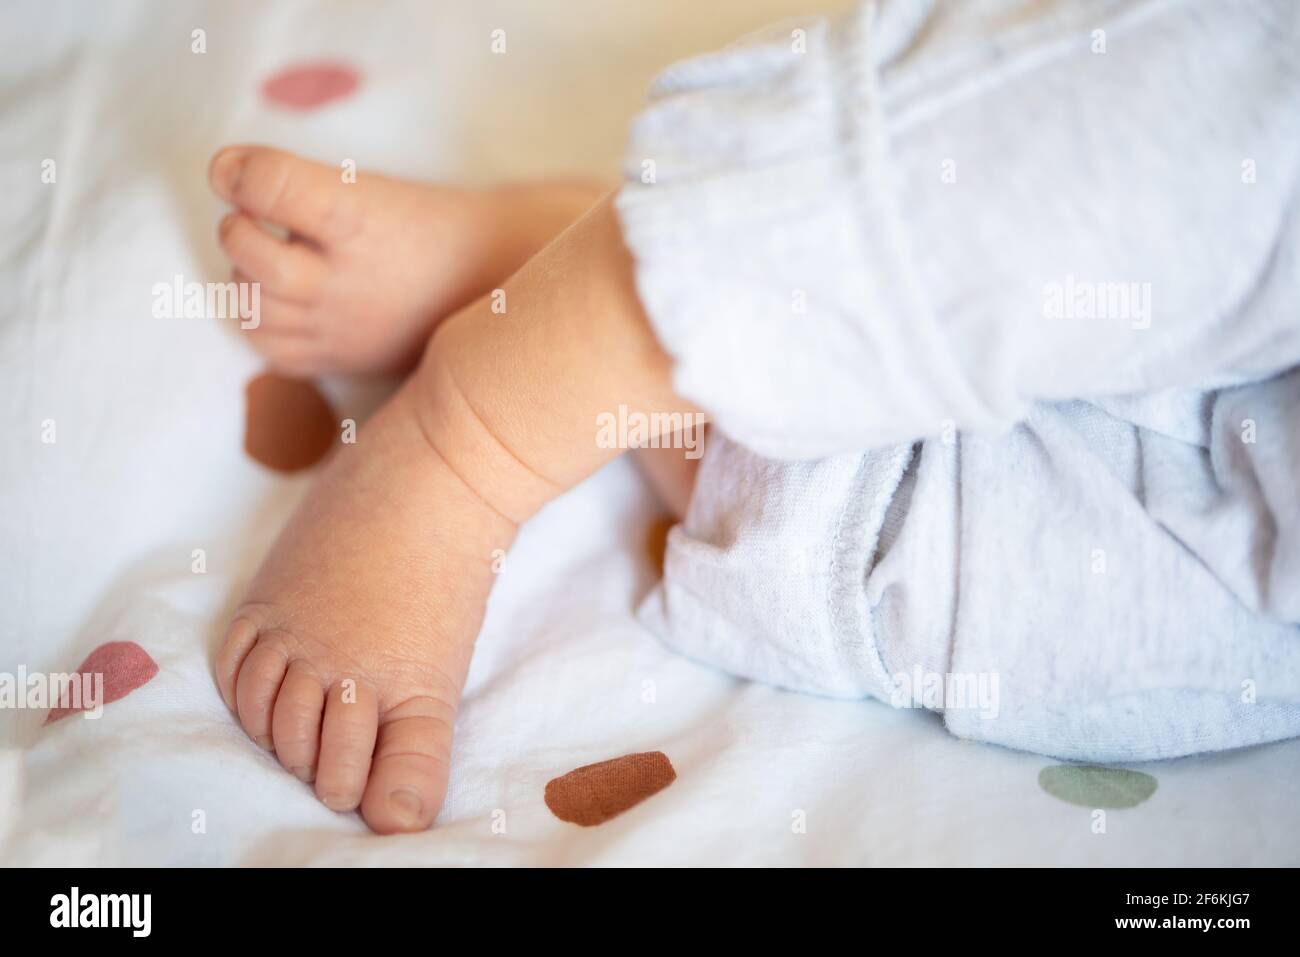 close-up of legs and feet of newborn baby resting on bed Stock Photo